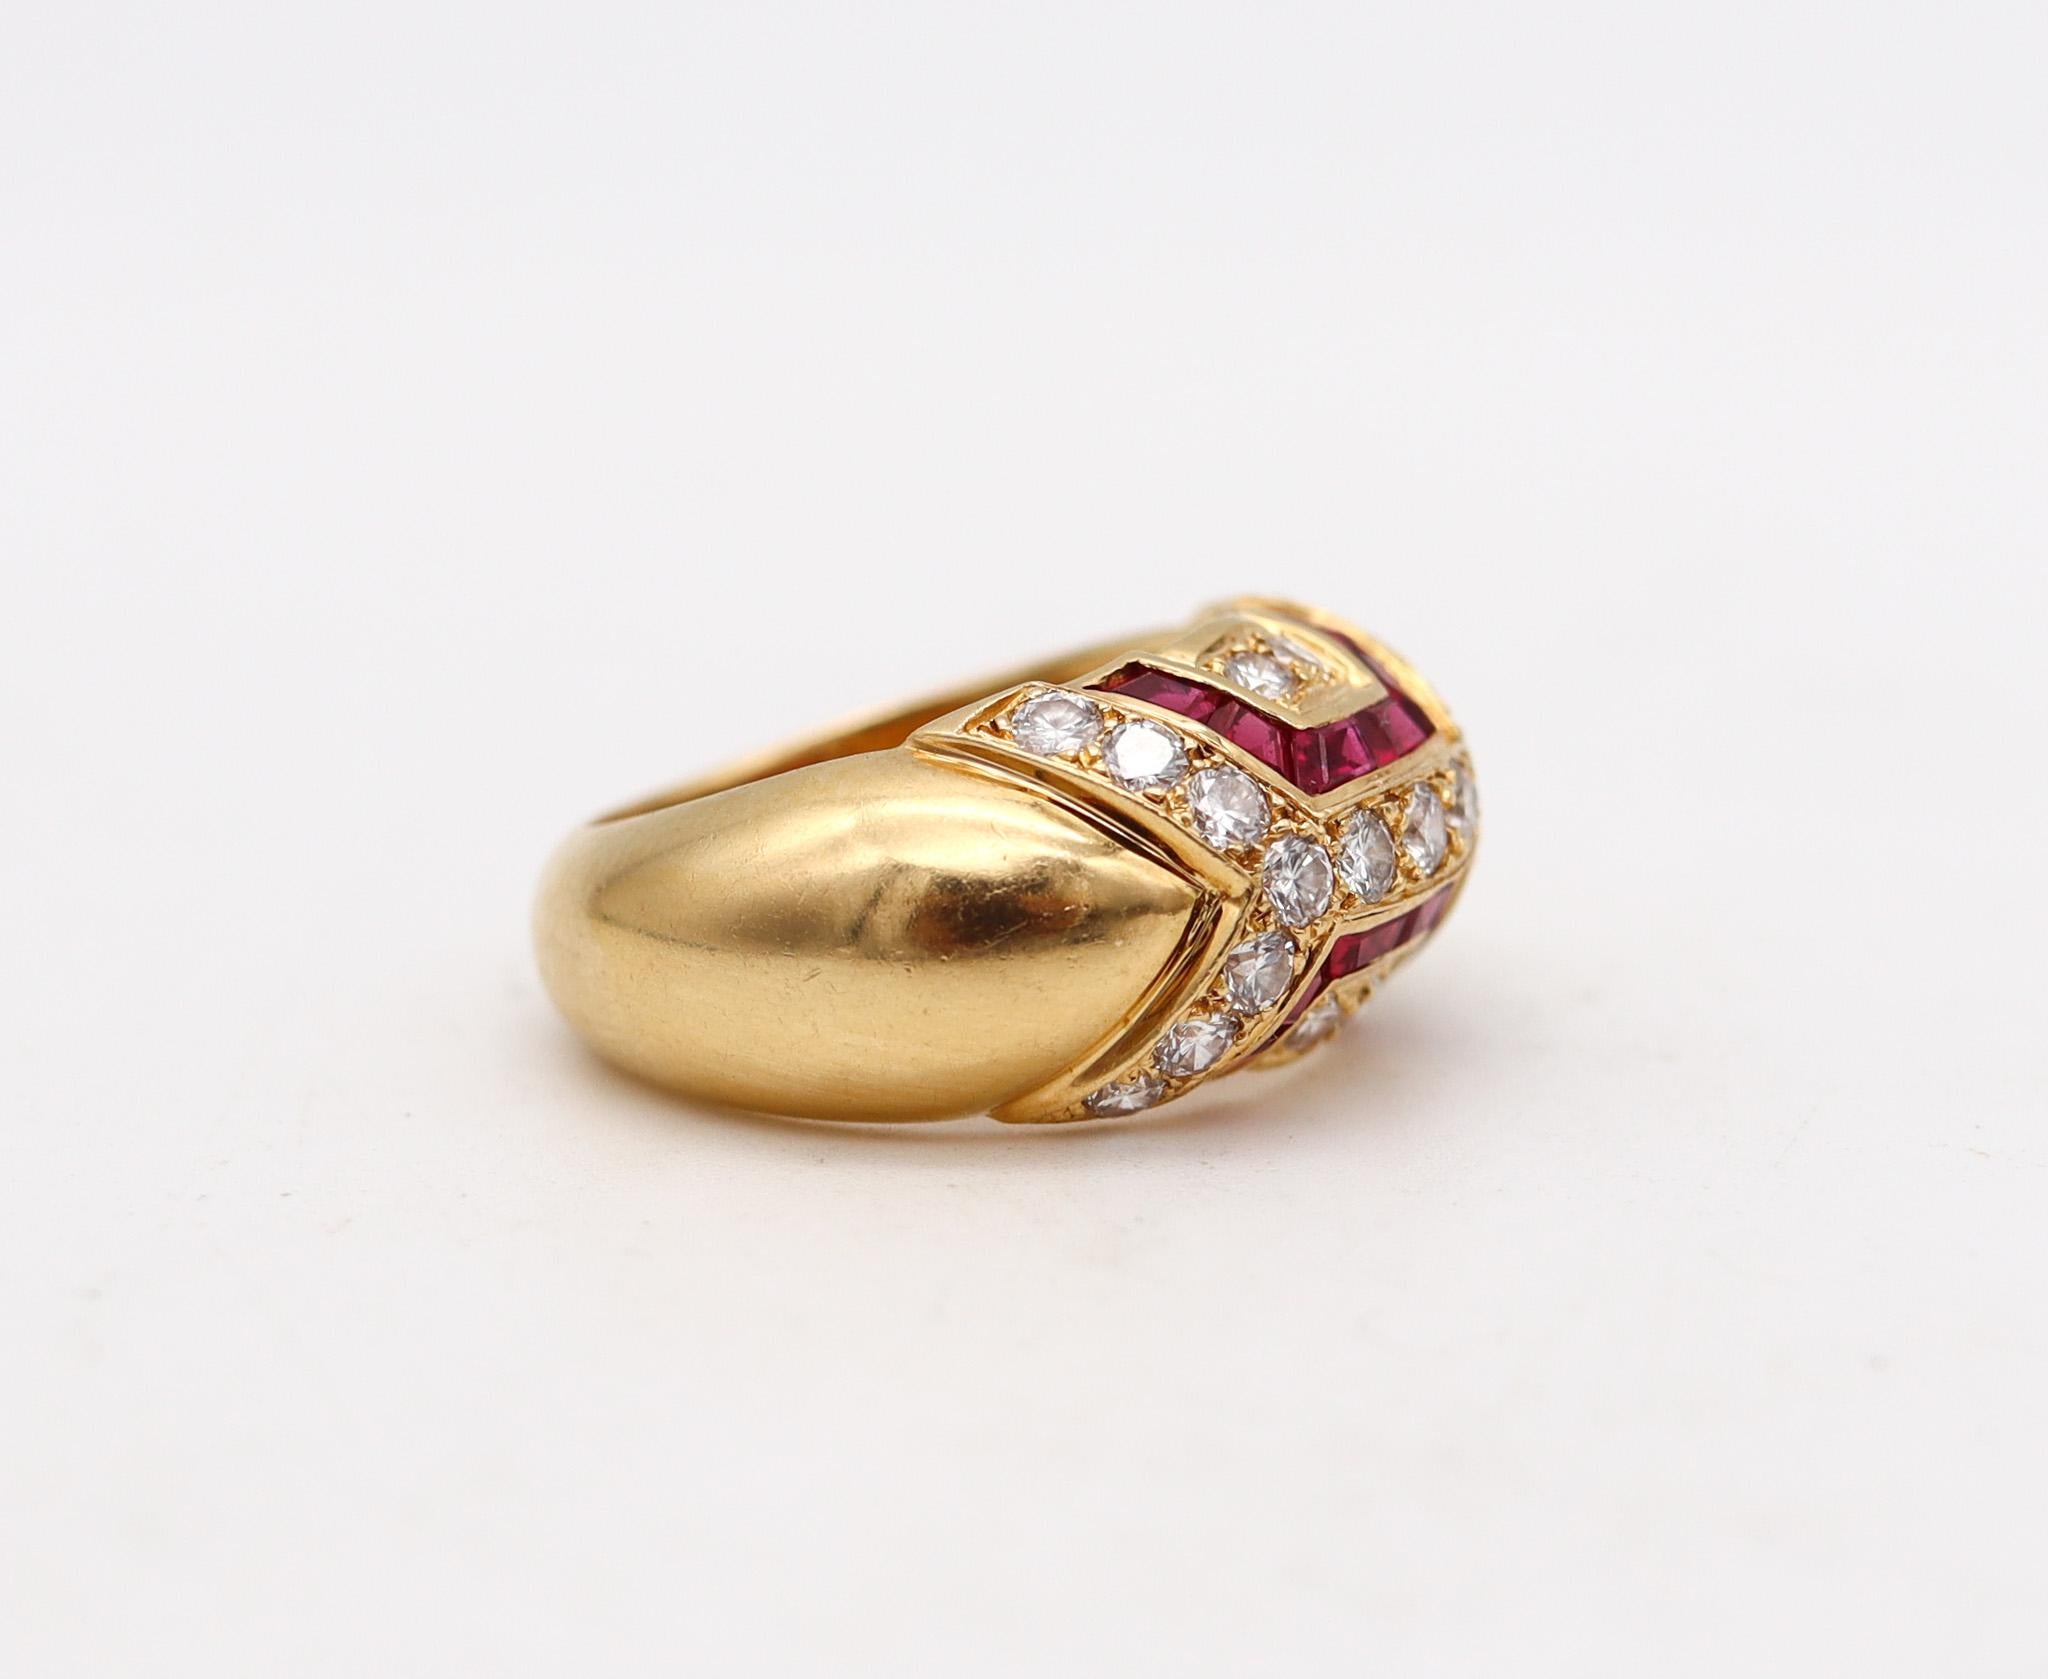 Brilliant Cut Boucheron Paris Modernist Ring In 18Kt Gold With 1.94 Ctw In Diamonds And Rubies For Sale